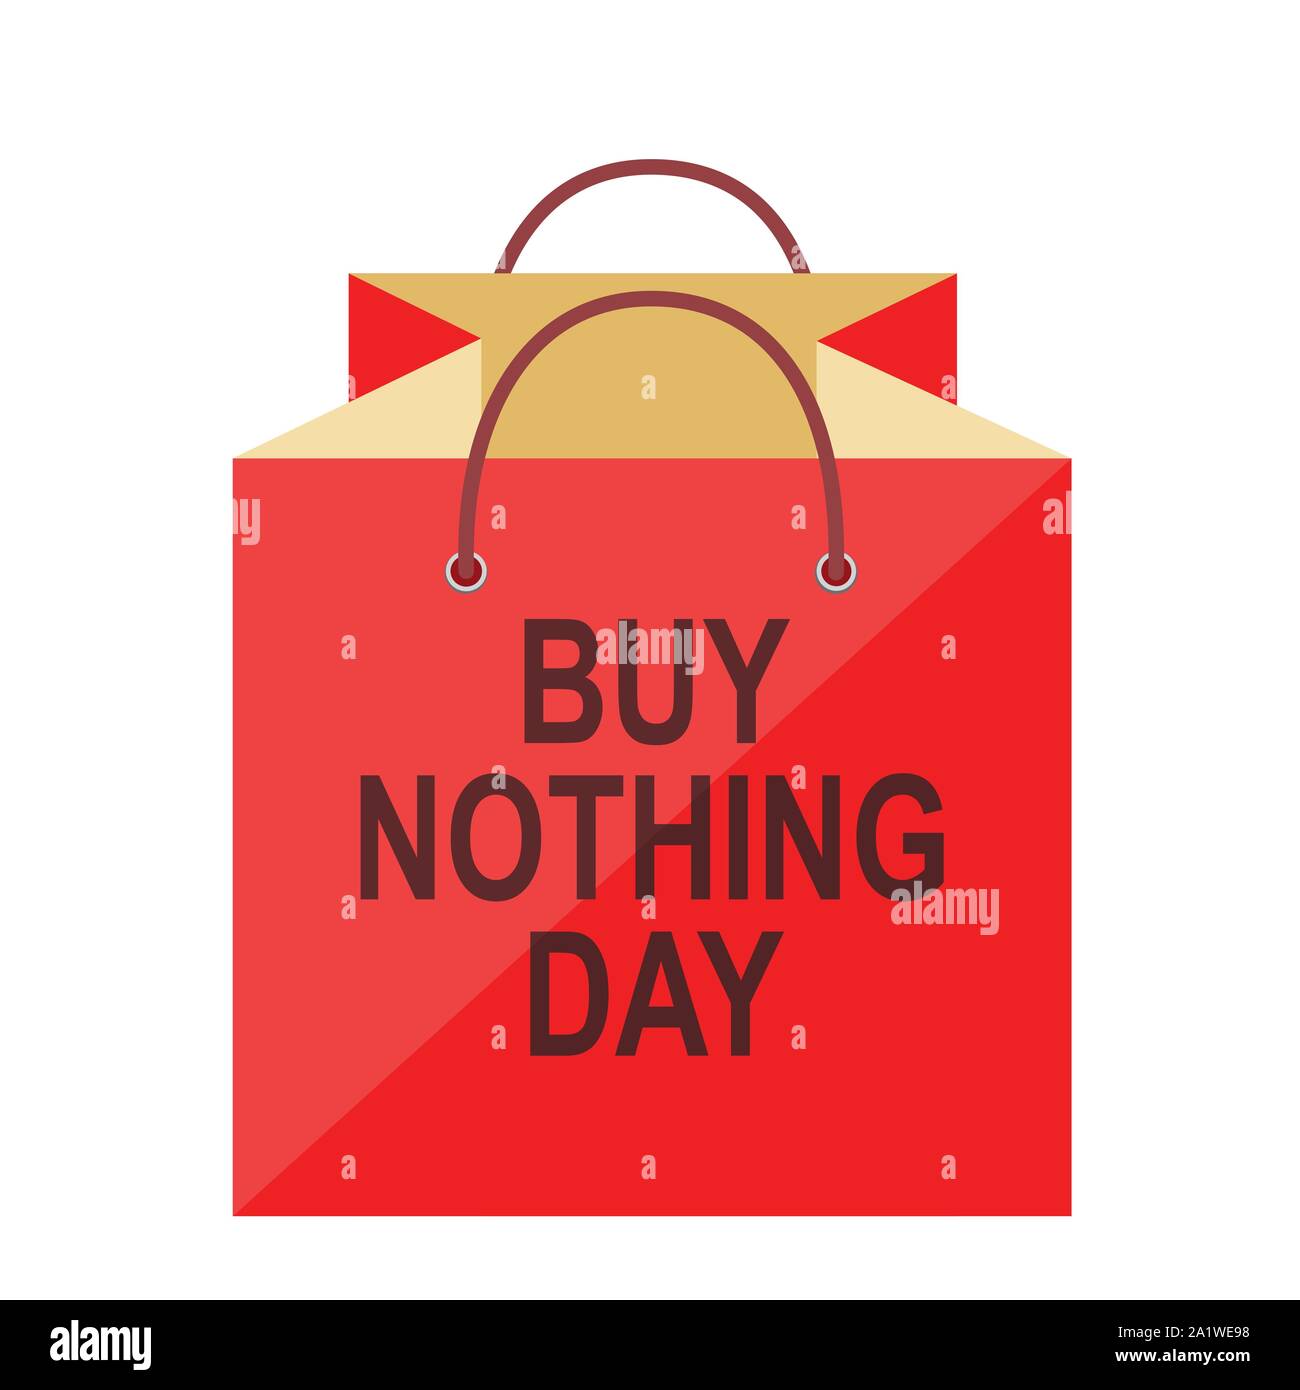 Buy Nothing Day. Concept of refusing purchases during the day in the form of a package. Isolated vector illustration on white background. Stock Vector